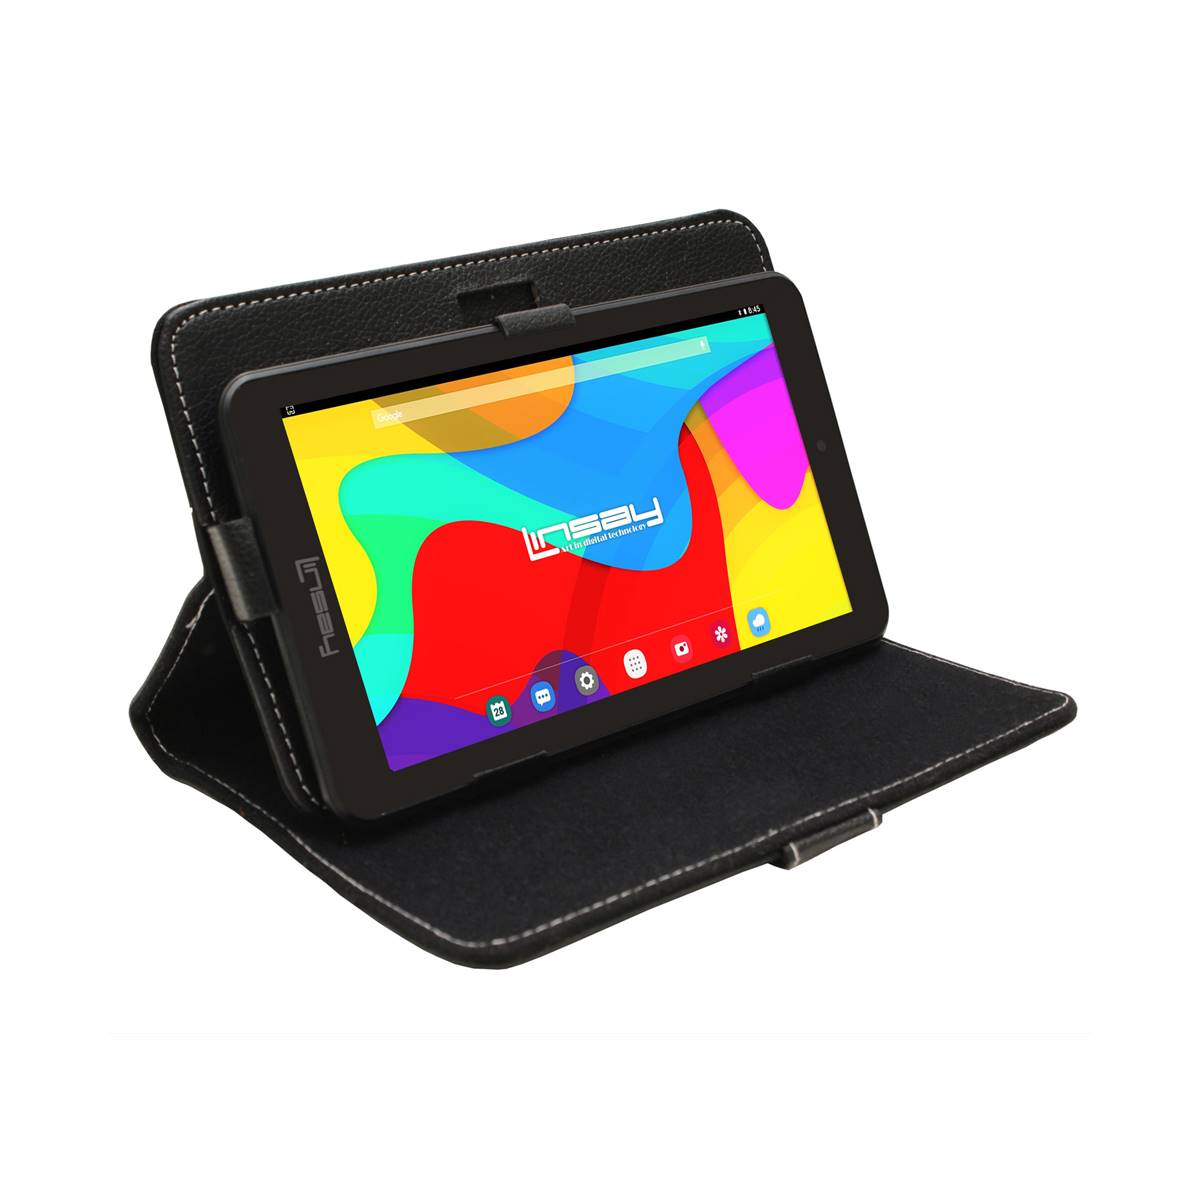 Linsay 7in. Quad Core Tablet With Headphones